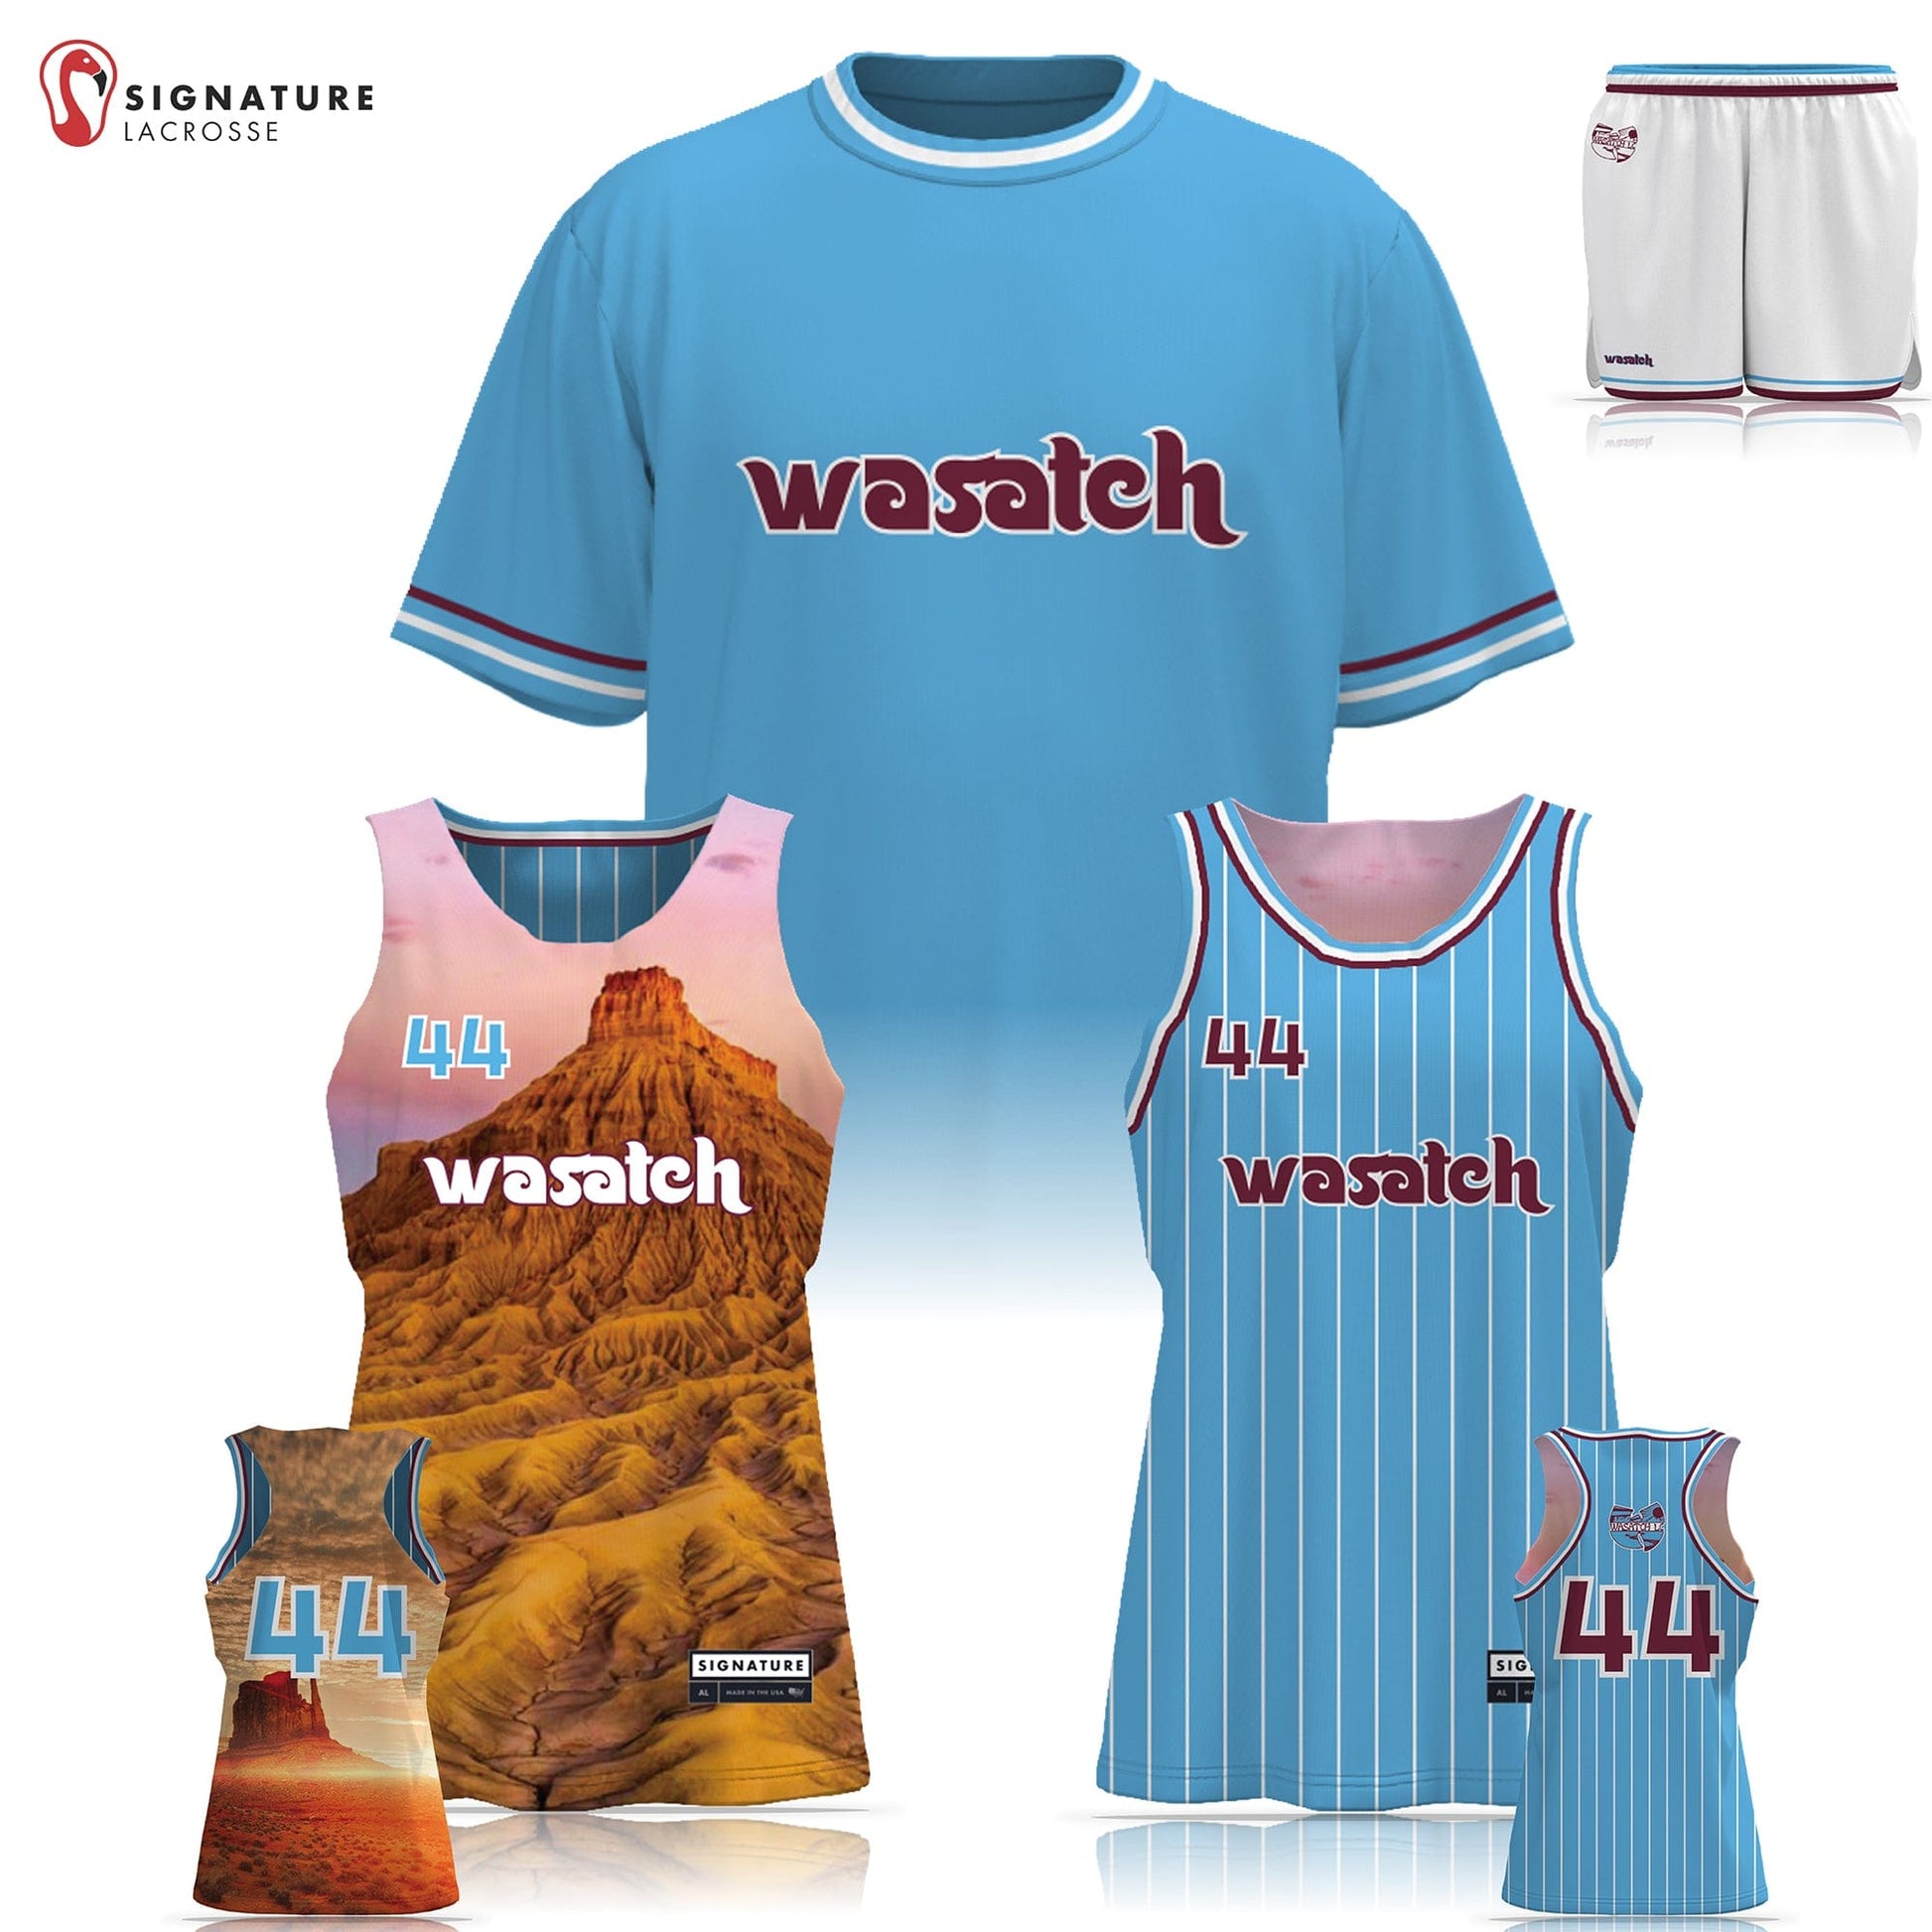 Wasatch Lacrosse  Women's Performance 3 Piece Game Package Signature Lacrosse